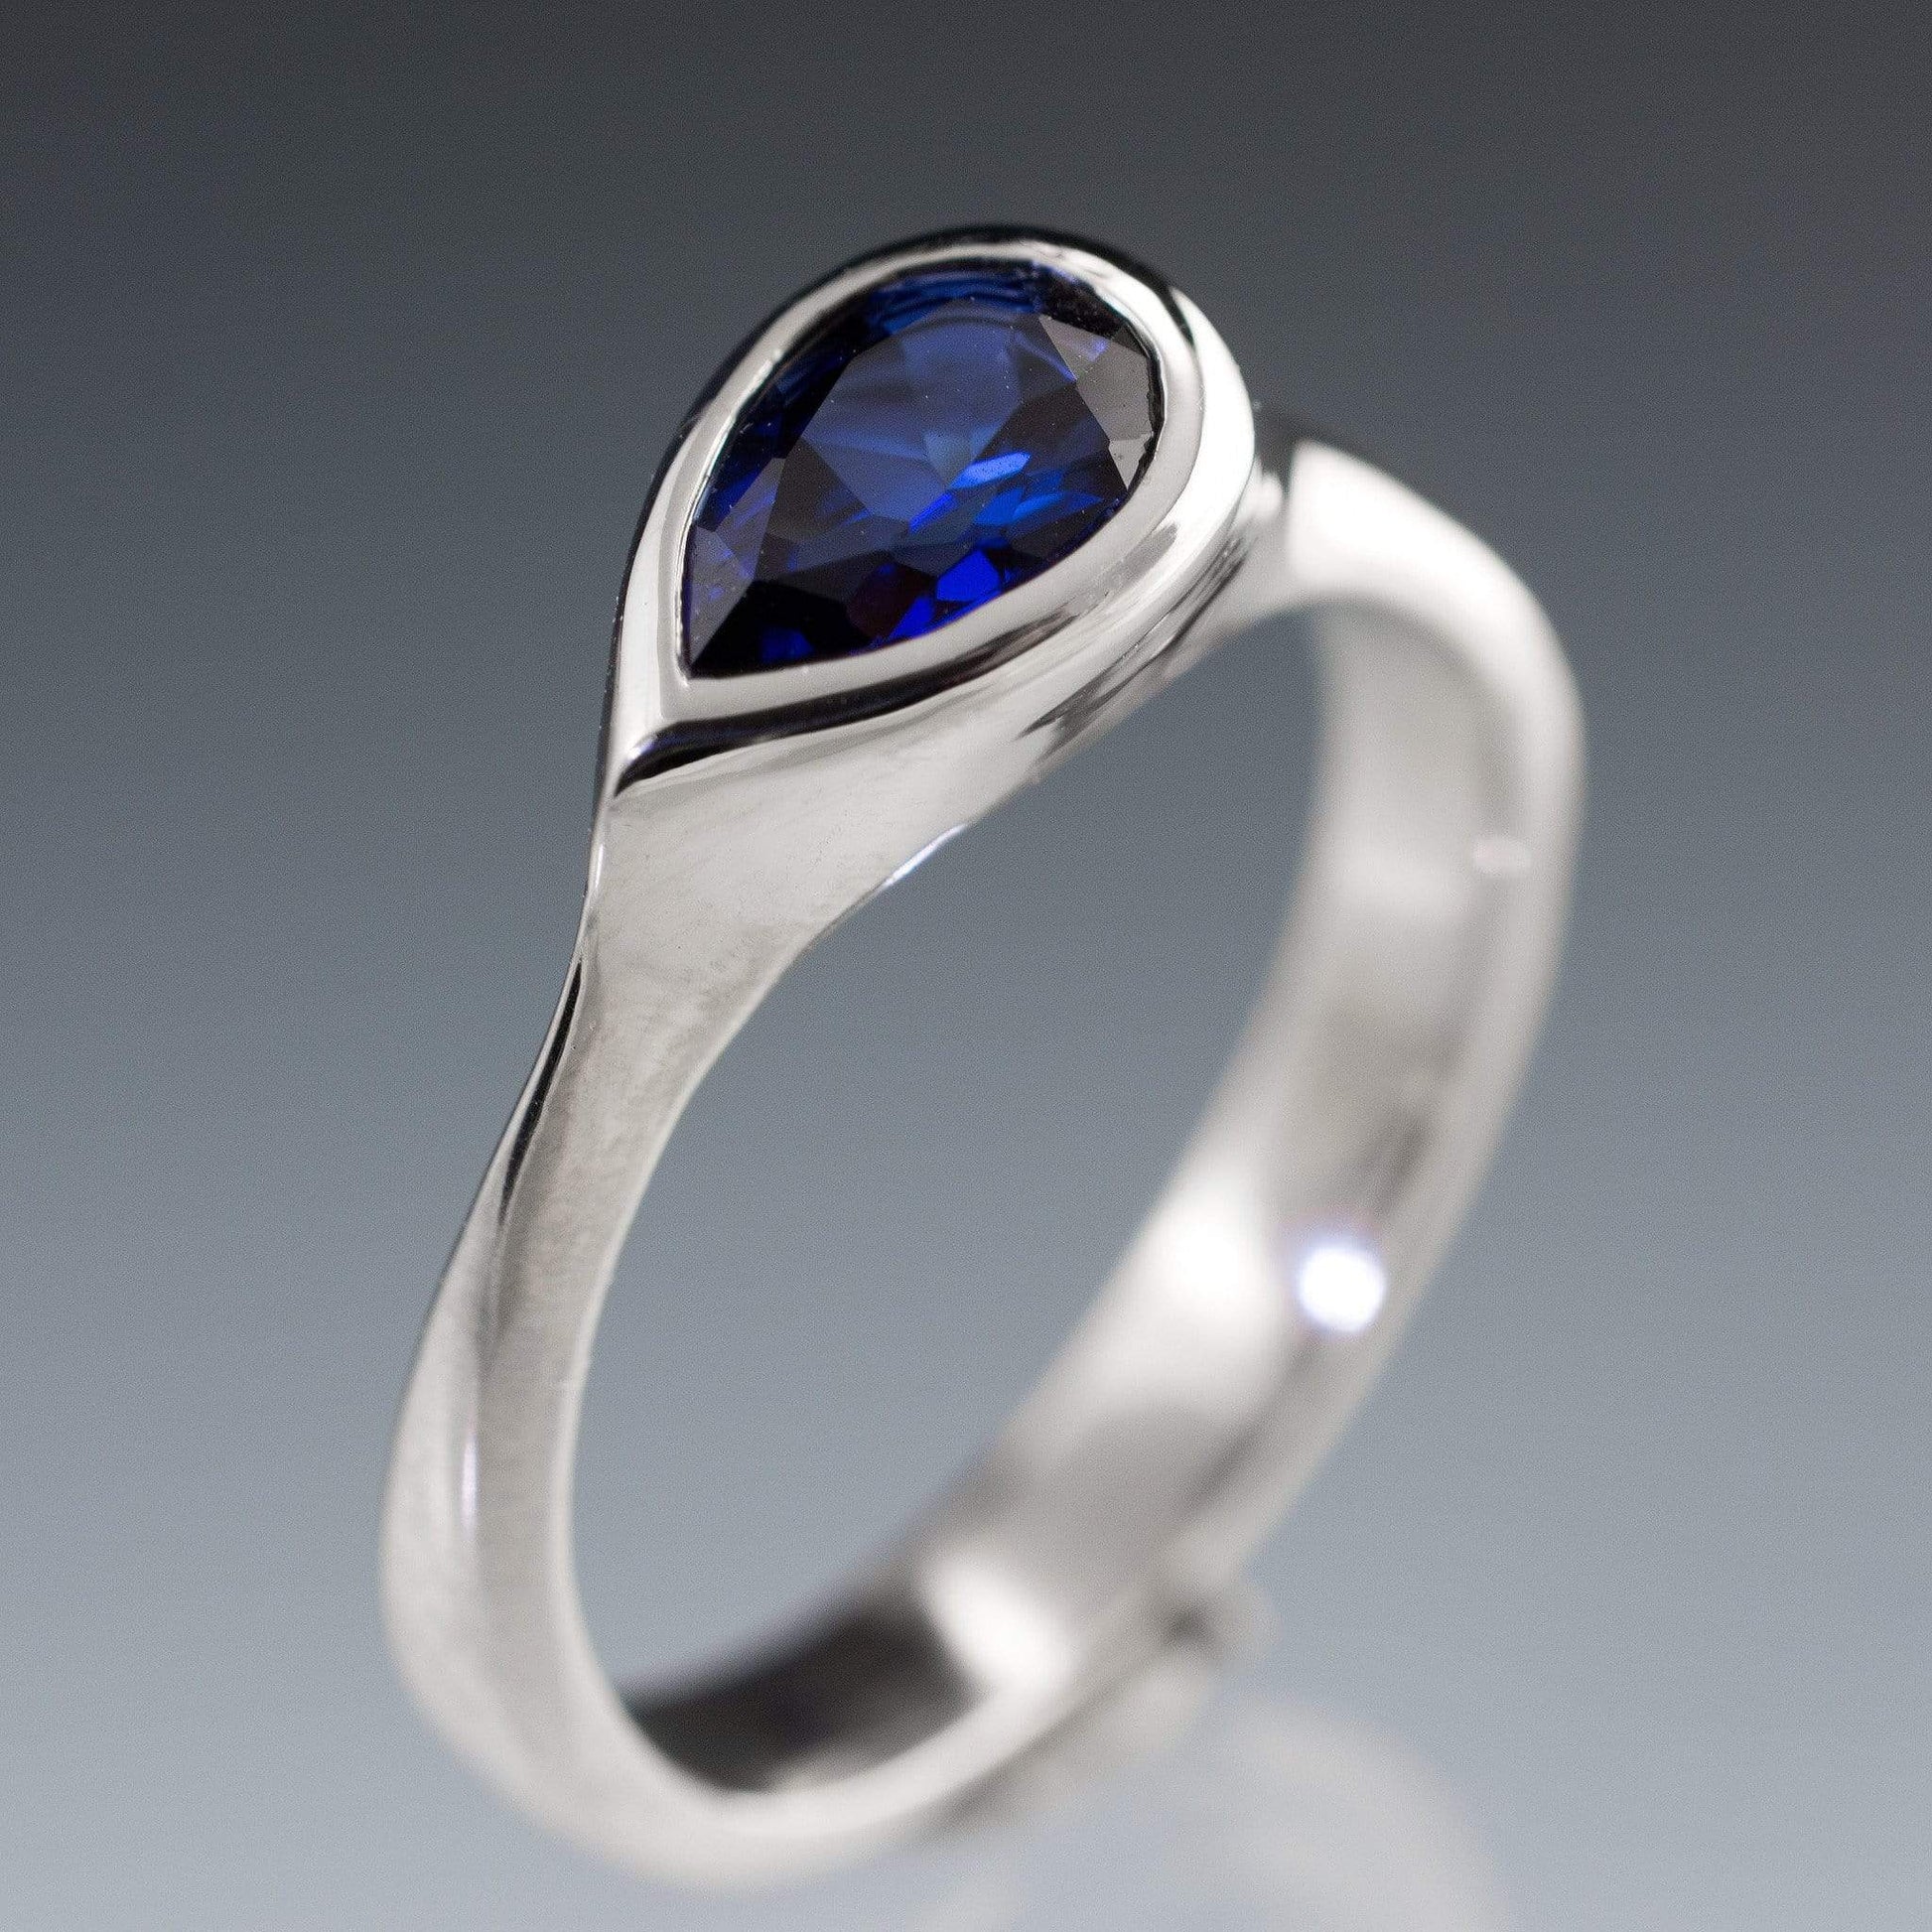 Pear Genuine Blue Sapphire Tear Drop Bezel Solitaire Engagement Ring Ring by Nodeform